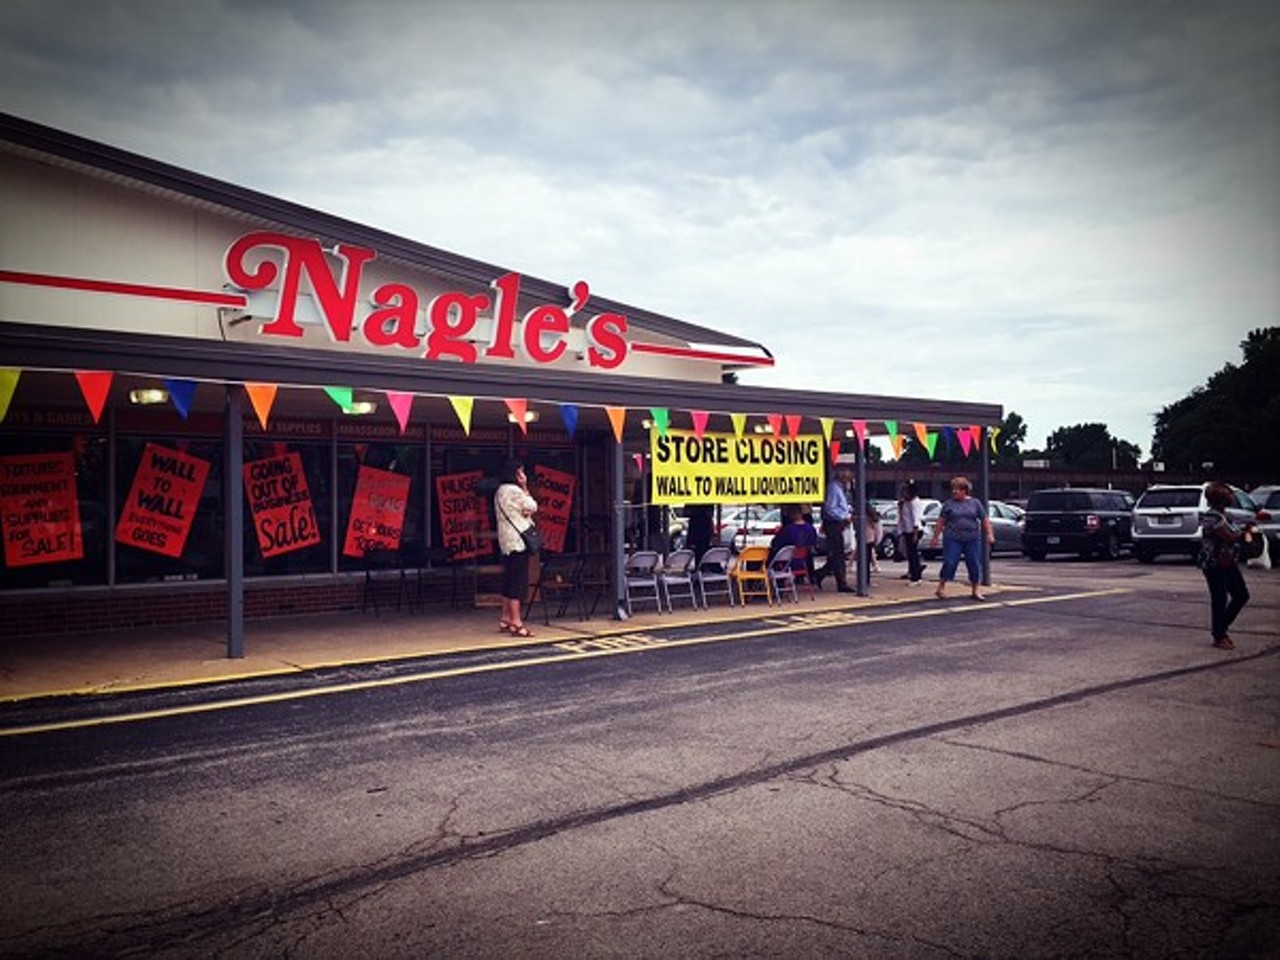 Nagle’s
Nagle’s loved weirdos and weirdos loved Nagle’s. The Florissant five-and-dime stayed strange to the end, too. When it closed in 2016, long-time shoppers flocked to the store to score discounts on everything from lava lamps to a farting alarm clock. Back in the 1980s, this bizarro shop was the best spot in town to get Troll dolls. They had every kind available and in every color, too. It was also the best place to stop if you were throwing a party because the balloon section was huge and there were so many gift options.